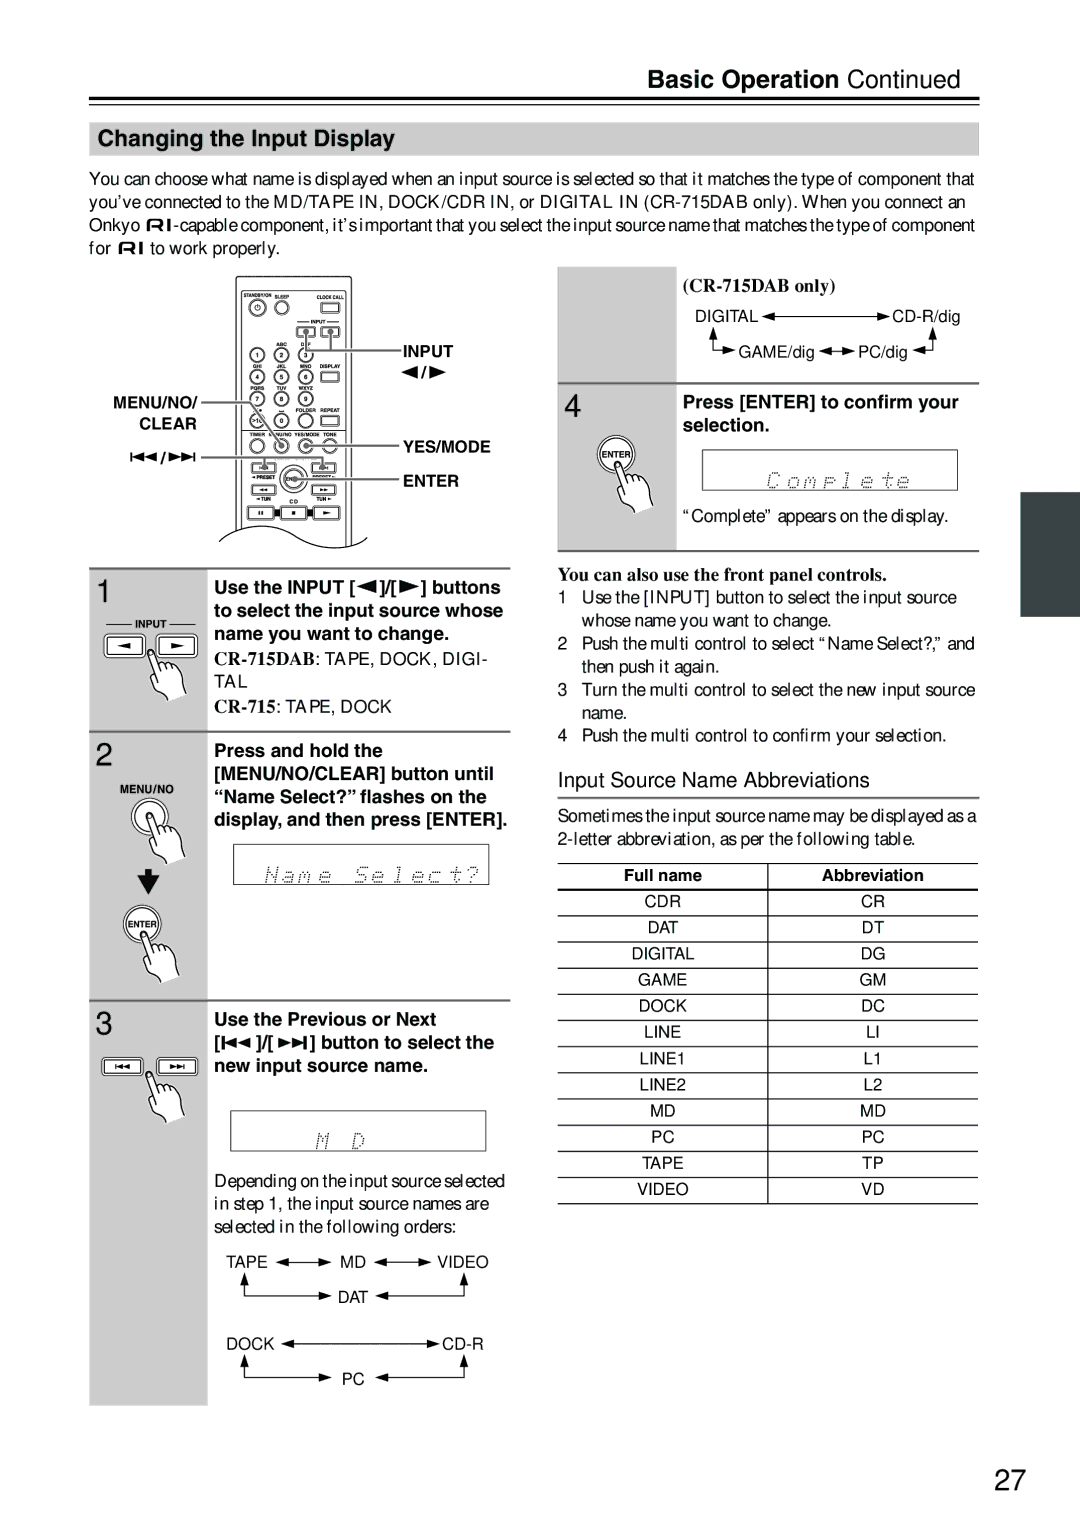 Onkyo CR-715DAB instruction manual Changing the Input Display, Input Source Name Abbreviations 